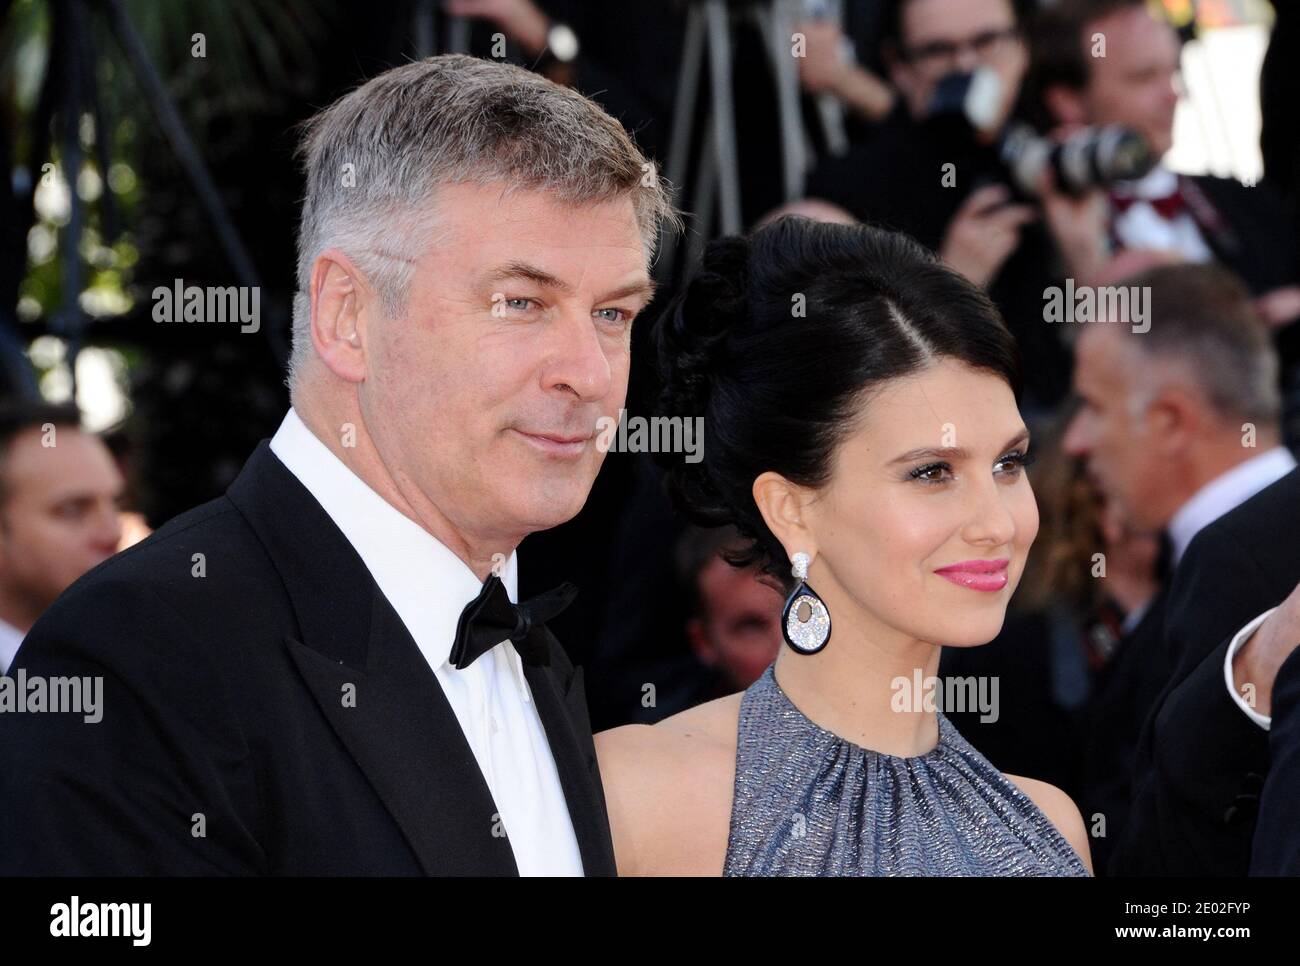 File photo dated May 20, 2013 of Alec Baldwin and wife Hilaria Thomas arriving for the Blood Ties screening held at the Palais Des Festivals as part of the 66th Cannes Film Festival in Cannes, France. Hilaria Baldwin has responded to claims she misled the public about her Spanish heritage. Ms Baldwin, a popular yoga instructor, has been accused on social media of faking her Spanish accent. In a seven-minute video on Instagram, Ms Baldwin said she was born in Boston but was partly raised in Spain. However, her management's biography of her states that she was born on the Spanish island of Mallo Stock Photo